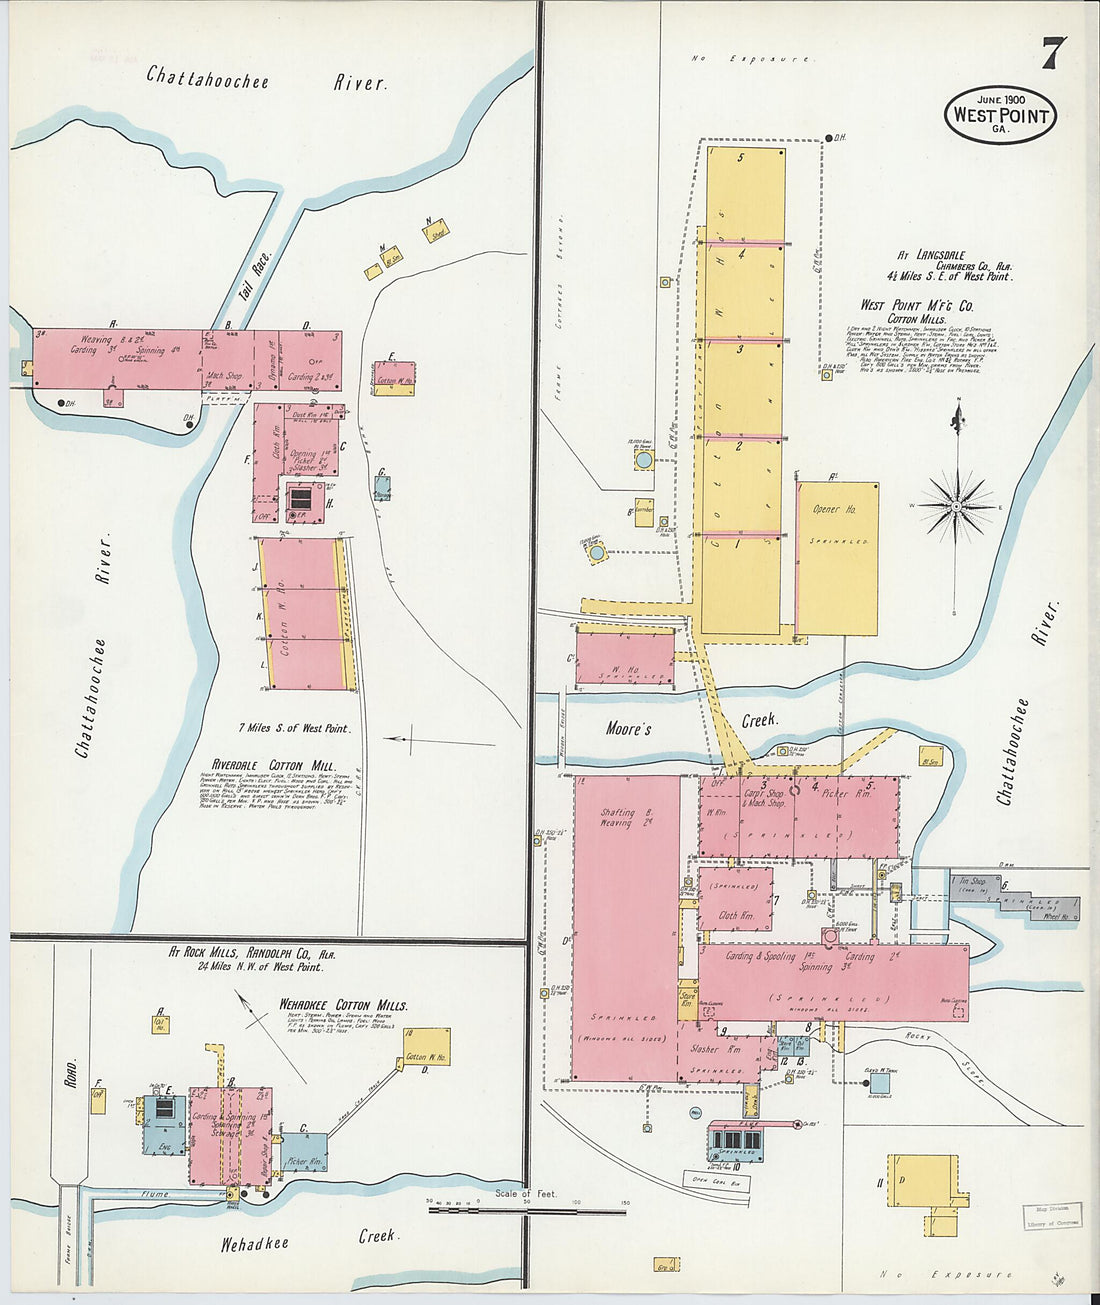 This old map of West Point, Troup County, Georgia was created by Sanborn Map Company in 1900